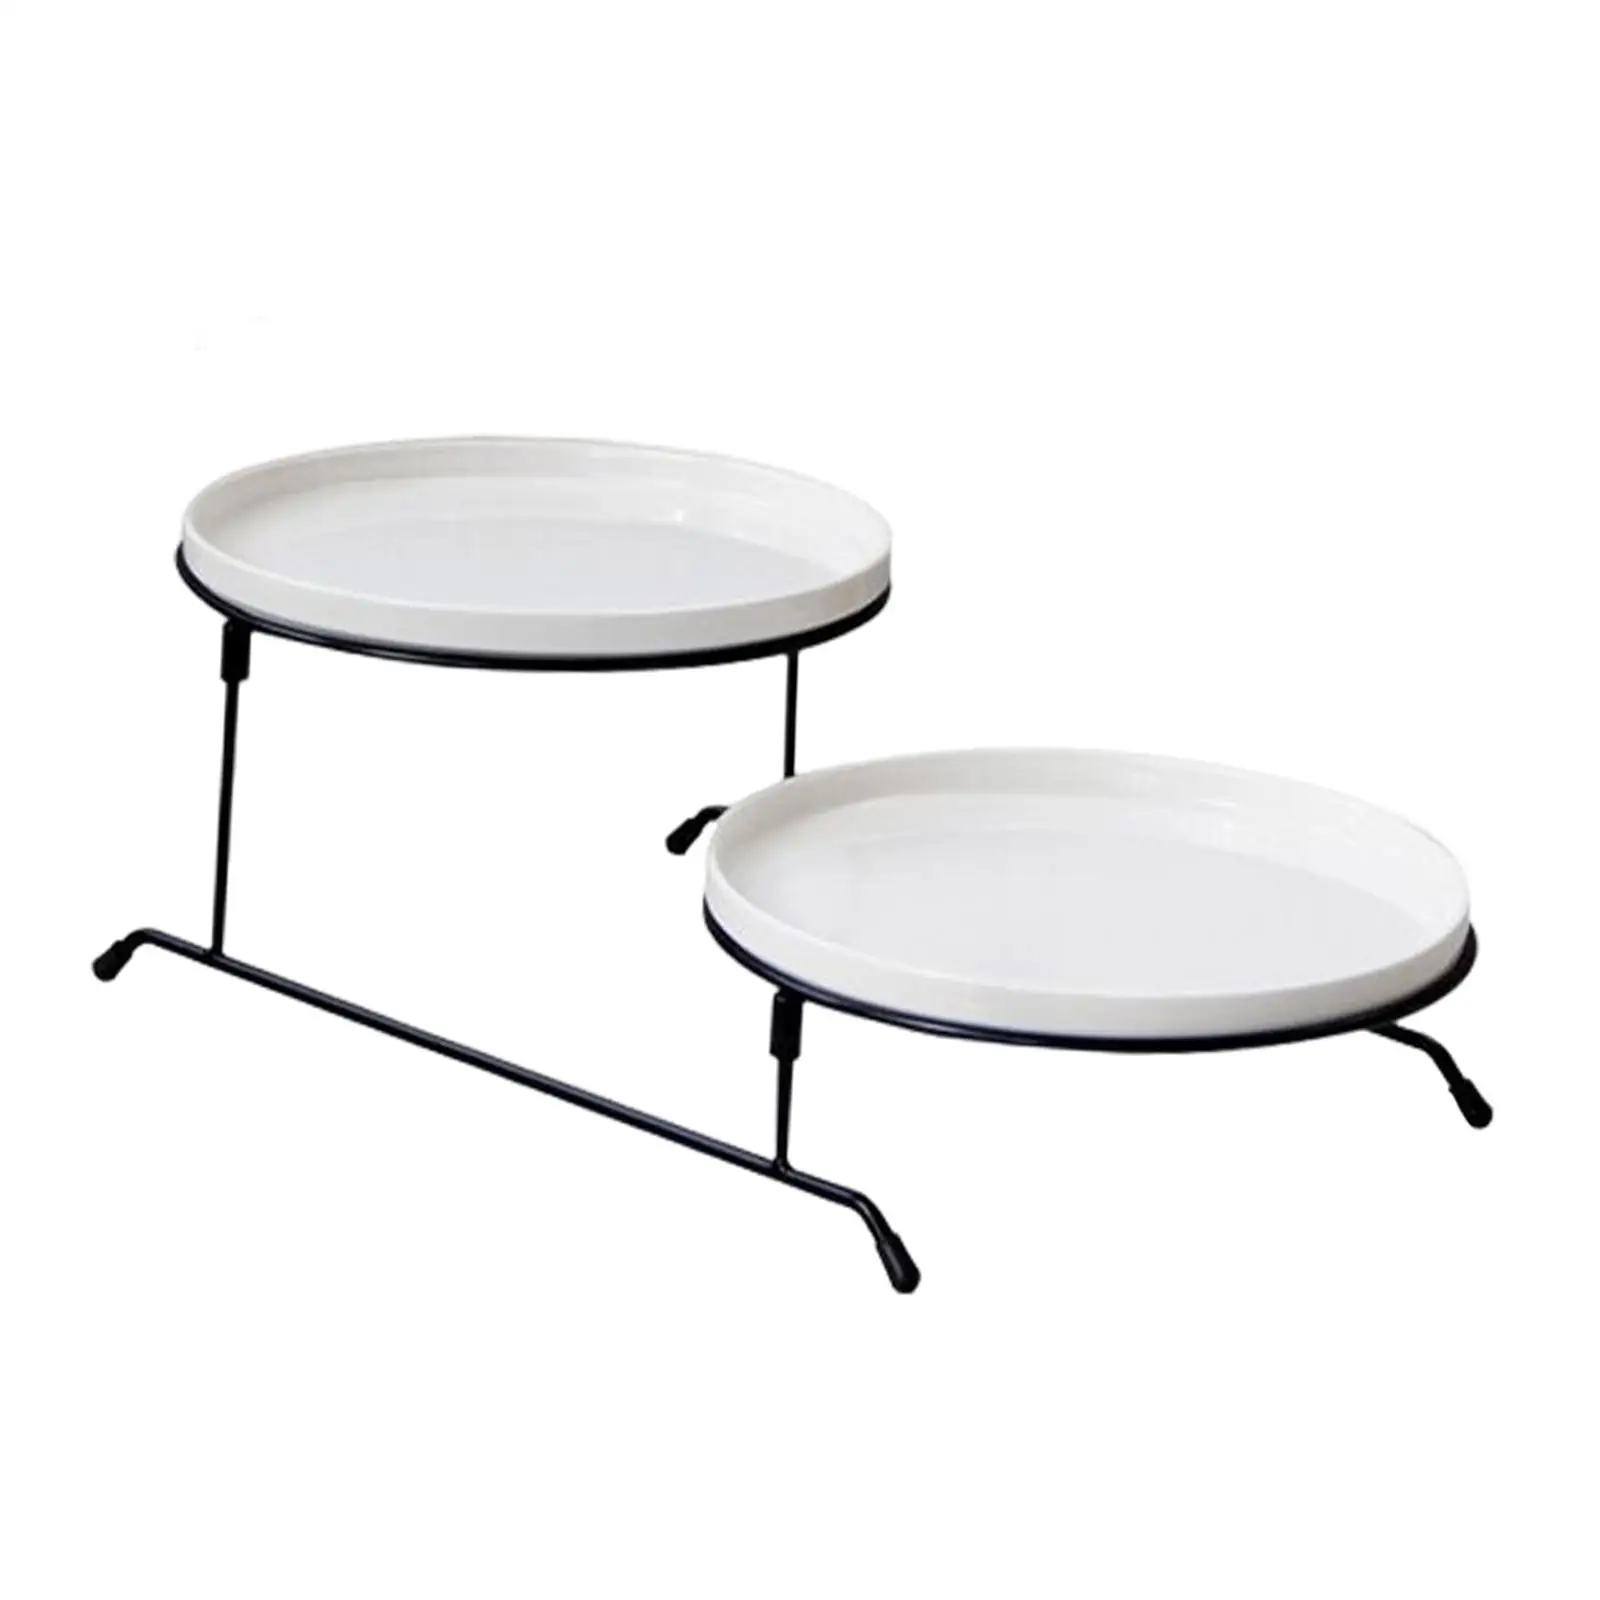 2 Tiered Serving Stand with White Ceramic Platters Dessert Display Server Mini Cake Cupcake Stand Events Hotel Buffet